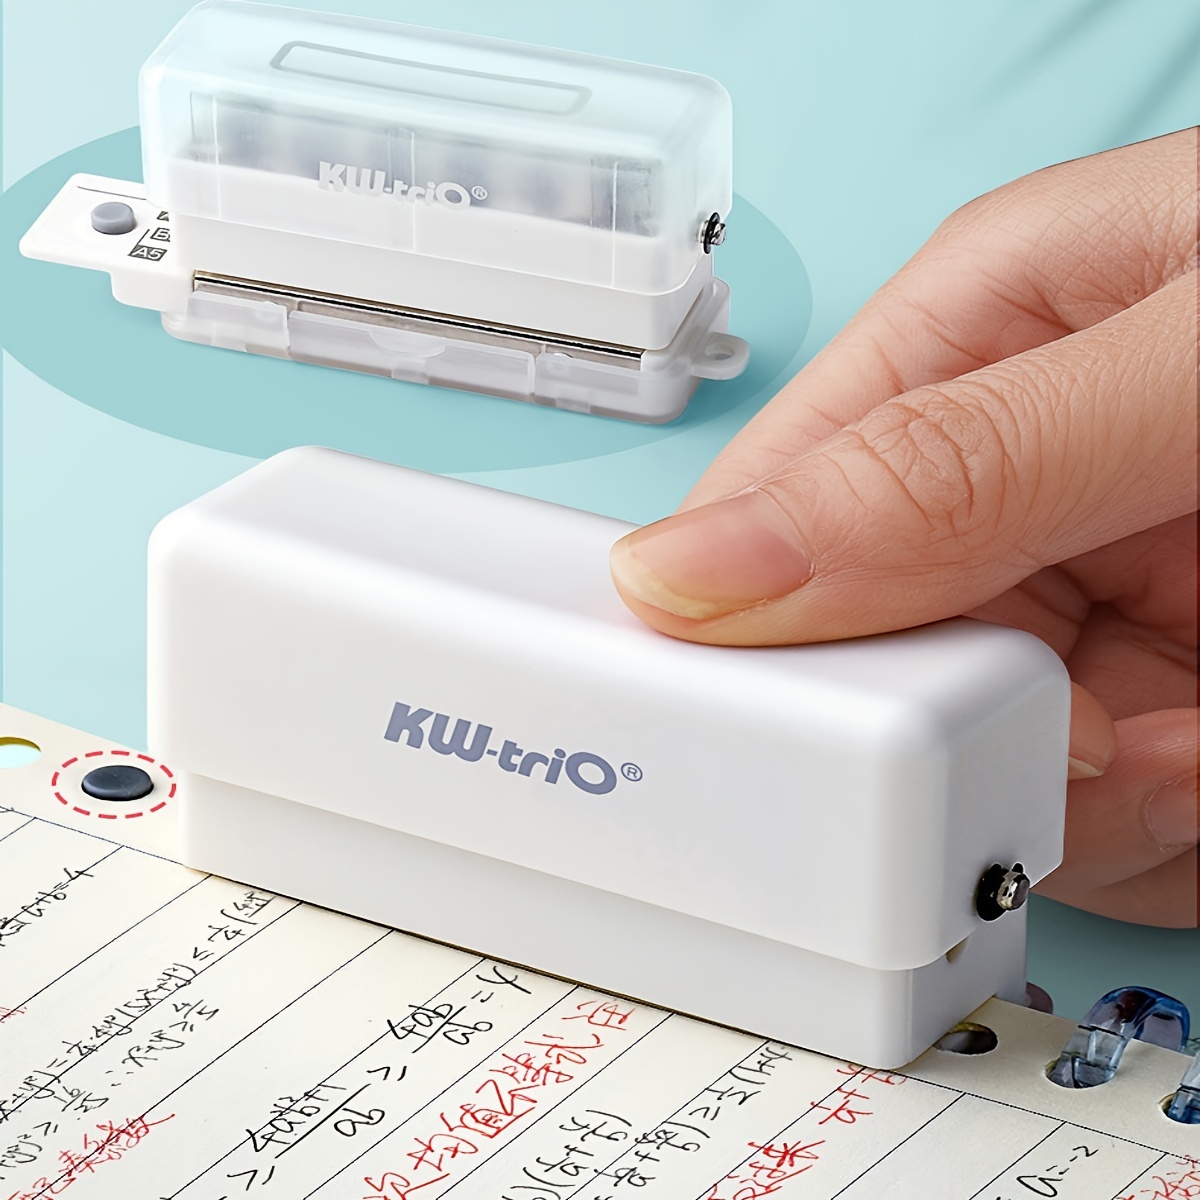 

Kw-trio 1pc Mini 6-hole Paper Puncher, Handheld Punches For A4 A5 B5 Notebooks, 5.5mm Hole Diameter, Durable Plastic Material